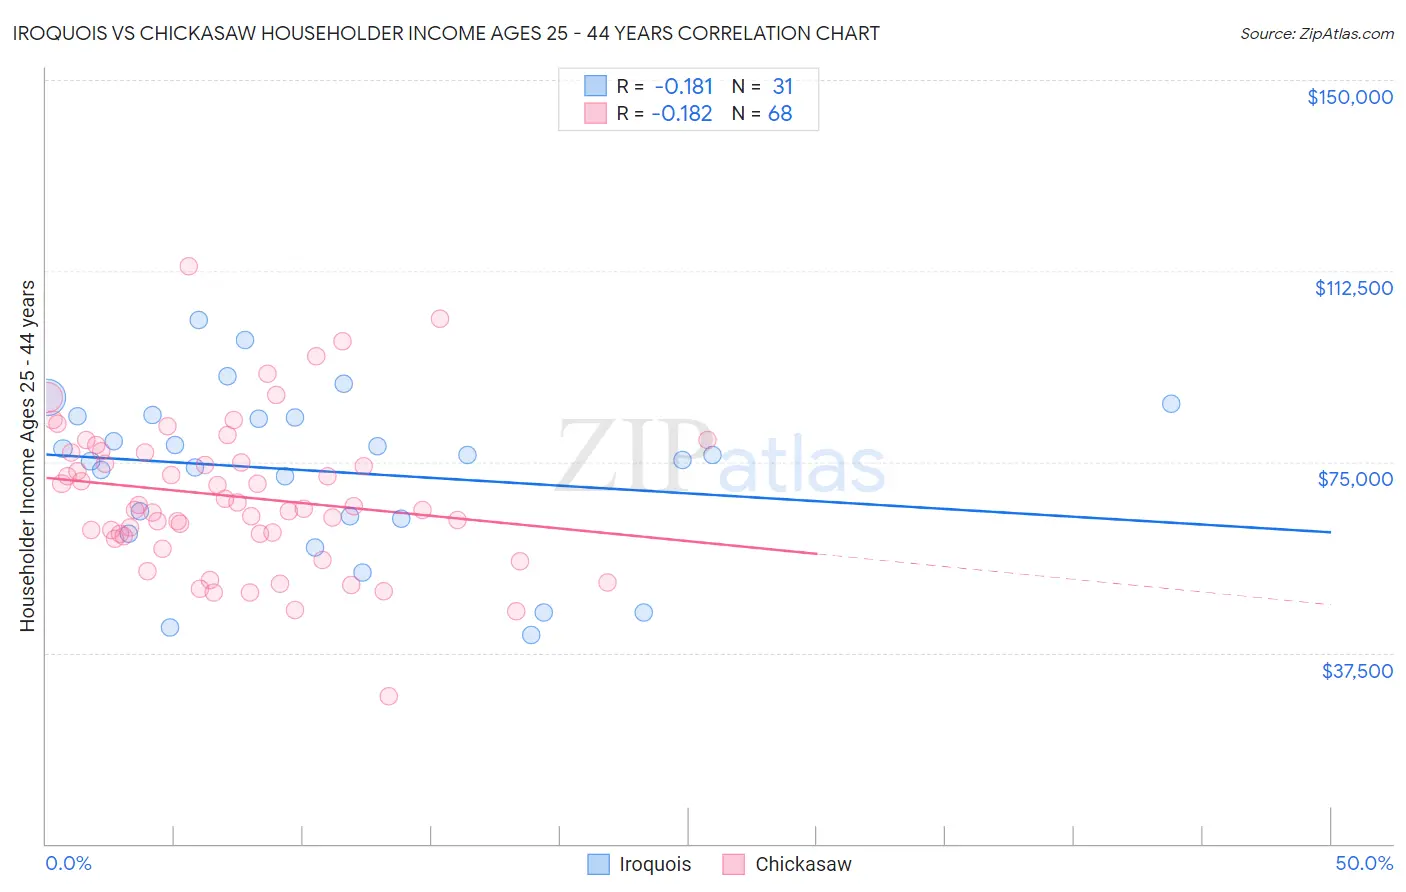 Iroquois vs Chickasaw Householder Income Ages 25 - 44 years